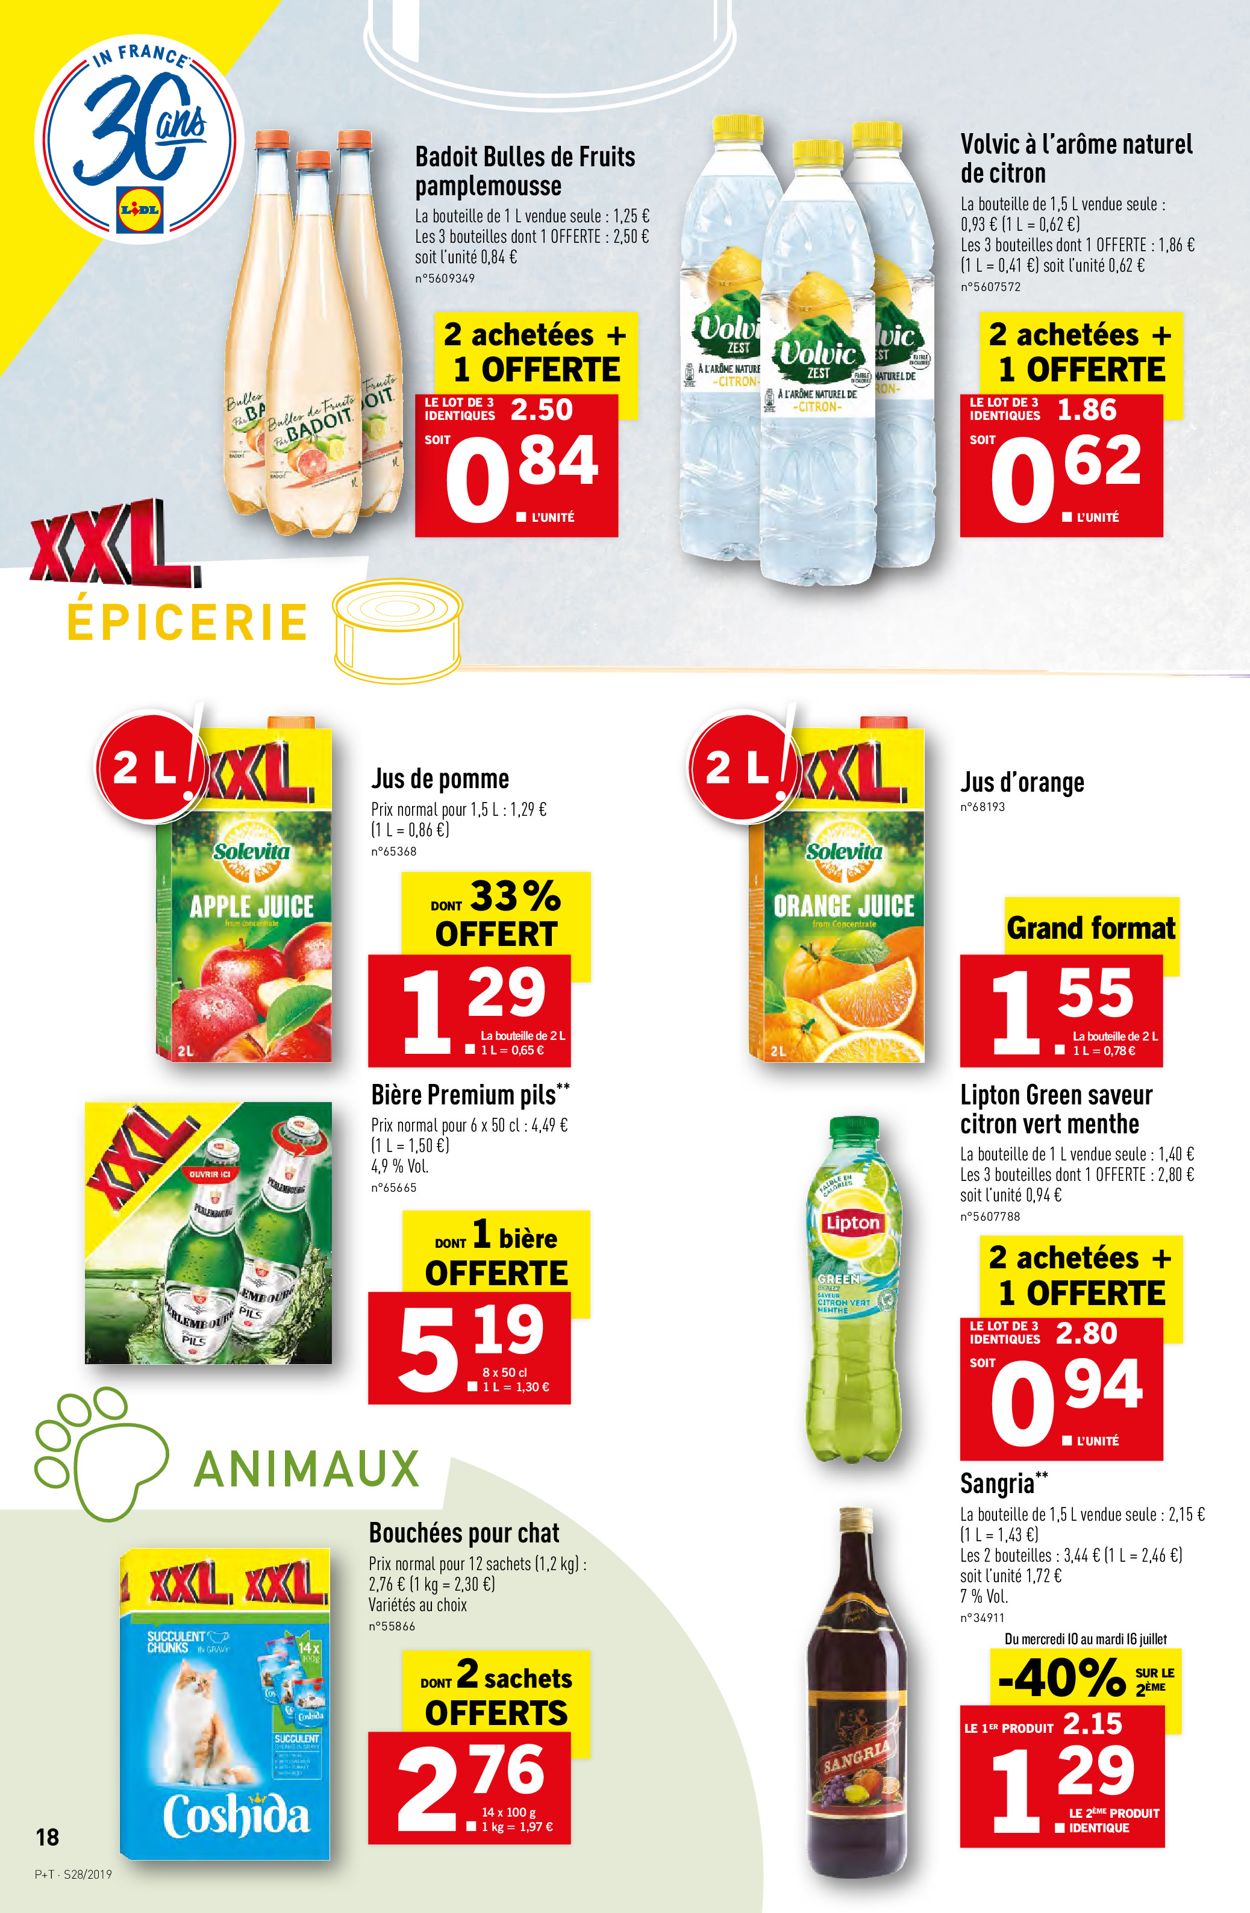 Lidl Catalogue - 10.07-16.07.2019 (Page 18)